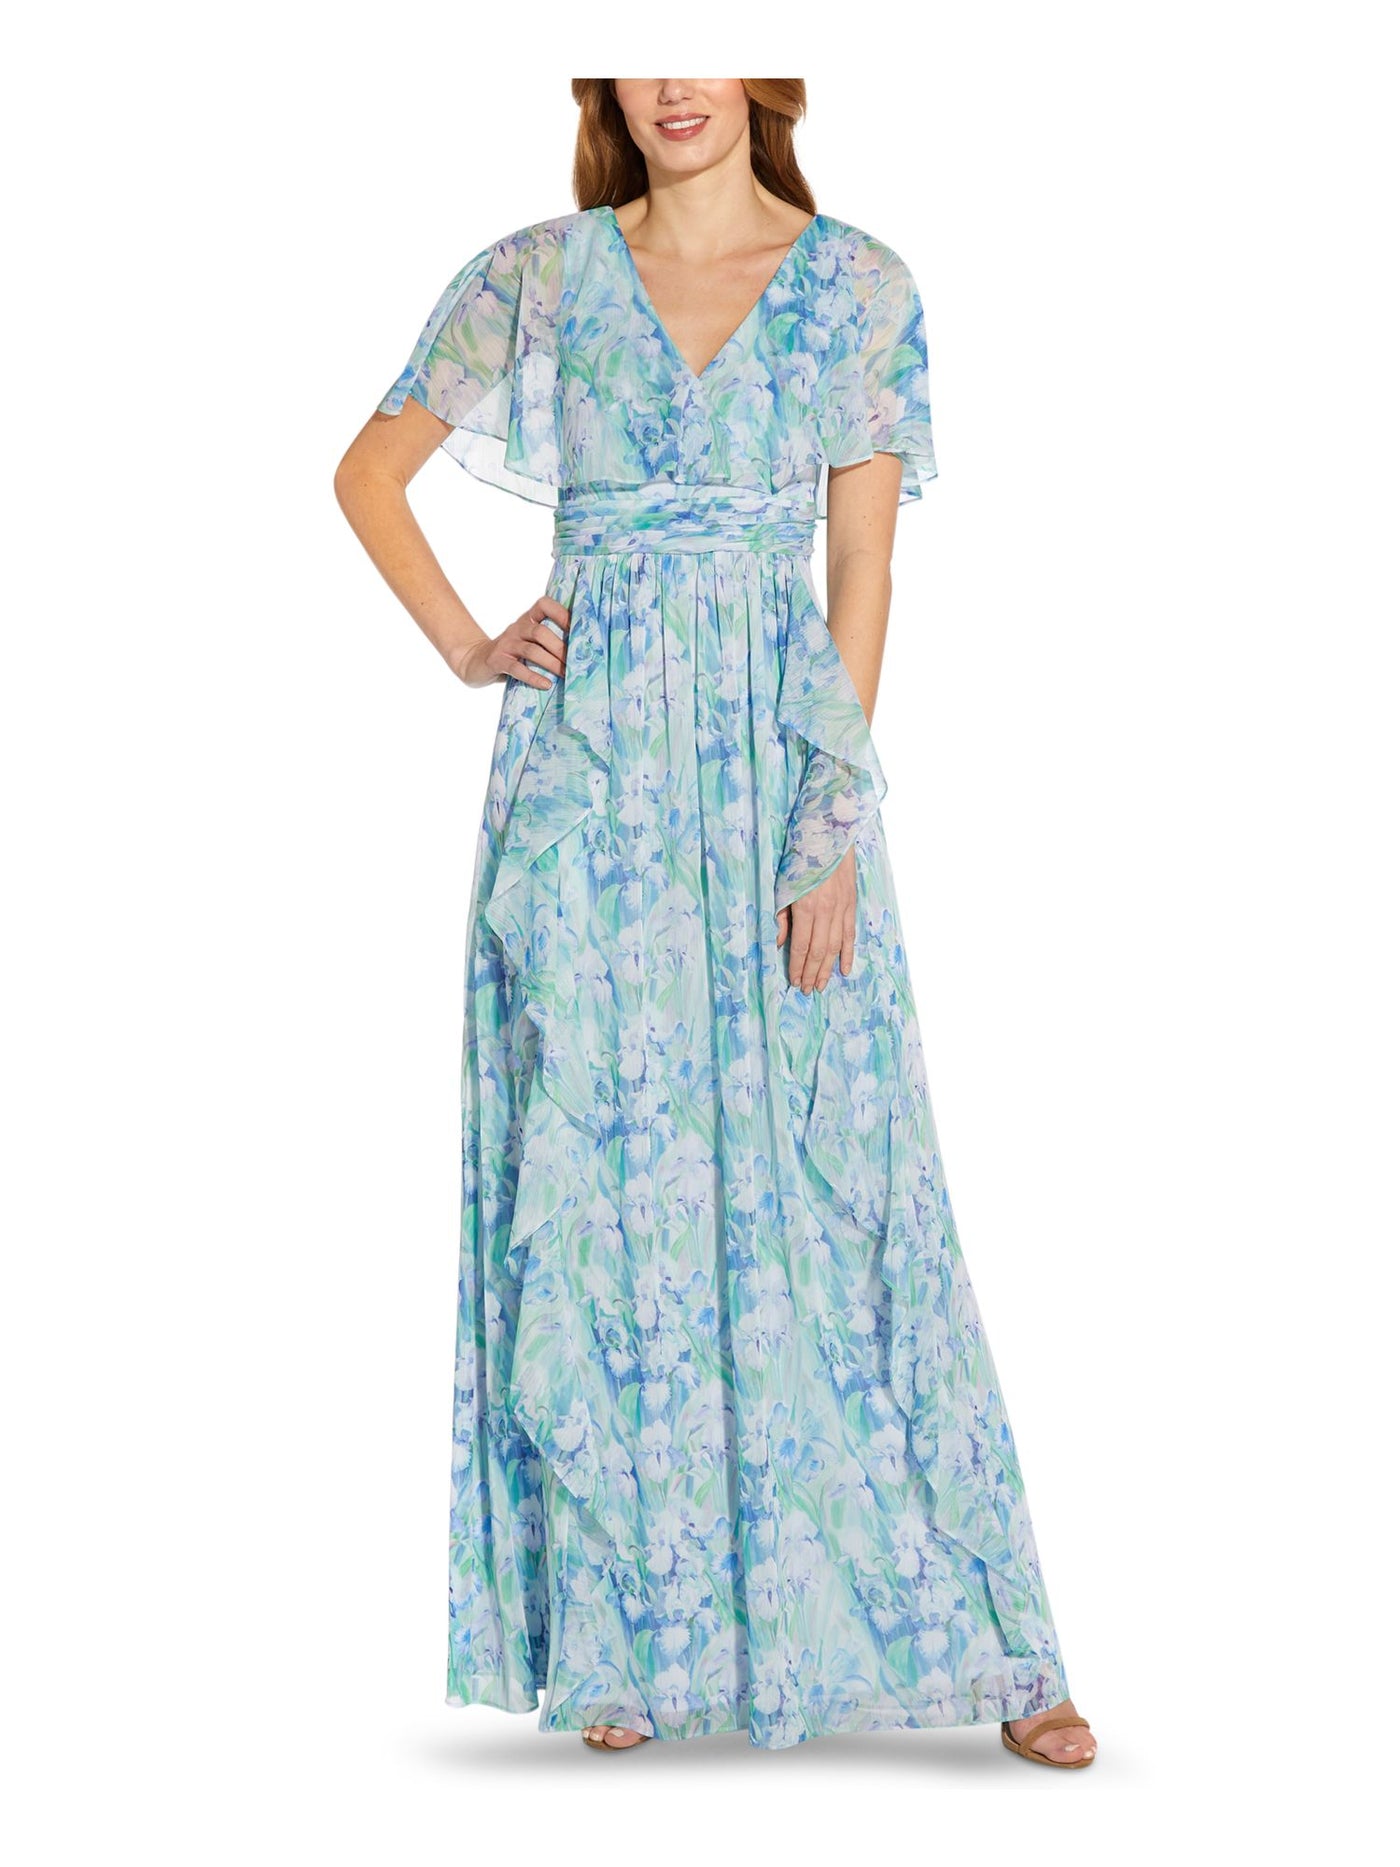 ADRIANNA PAPELL Womens Blue Zippered Pleated Lined Sheer Cape Overlay Ruffled Floral Short Sleeve V Neck Full-Length Gown Dress 2